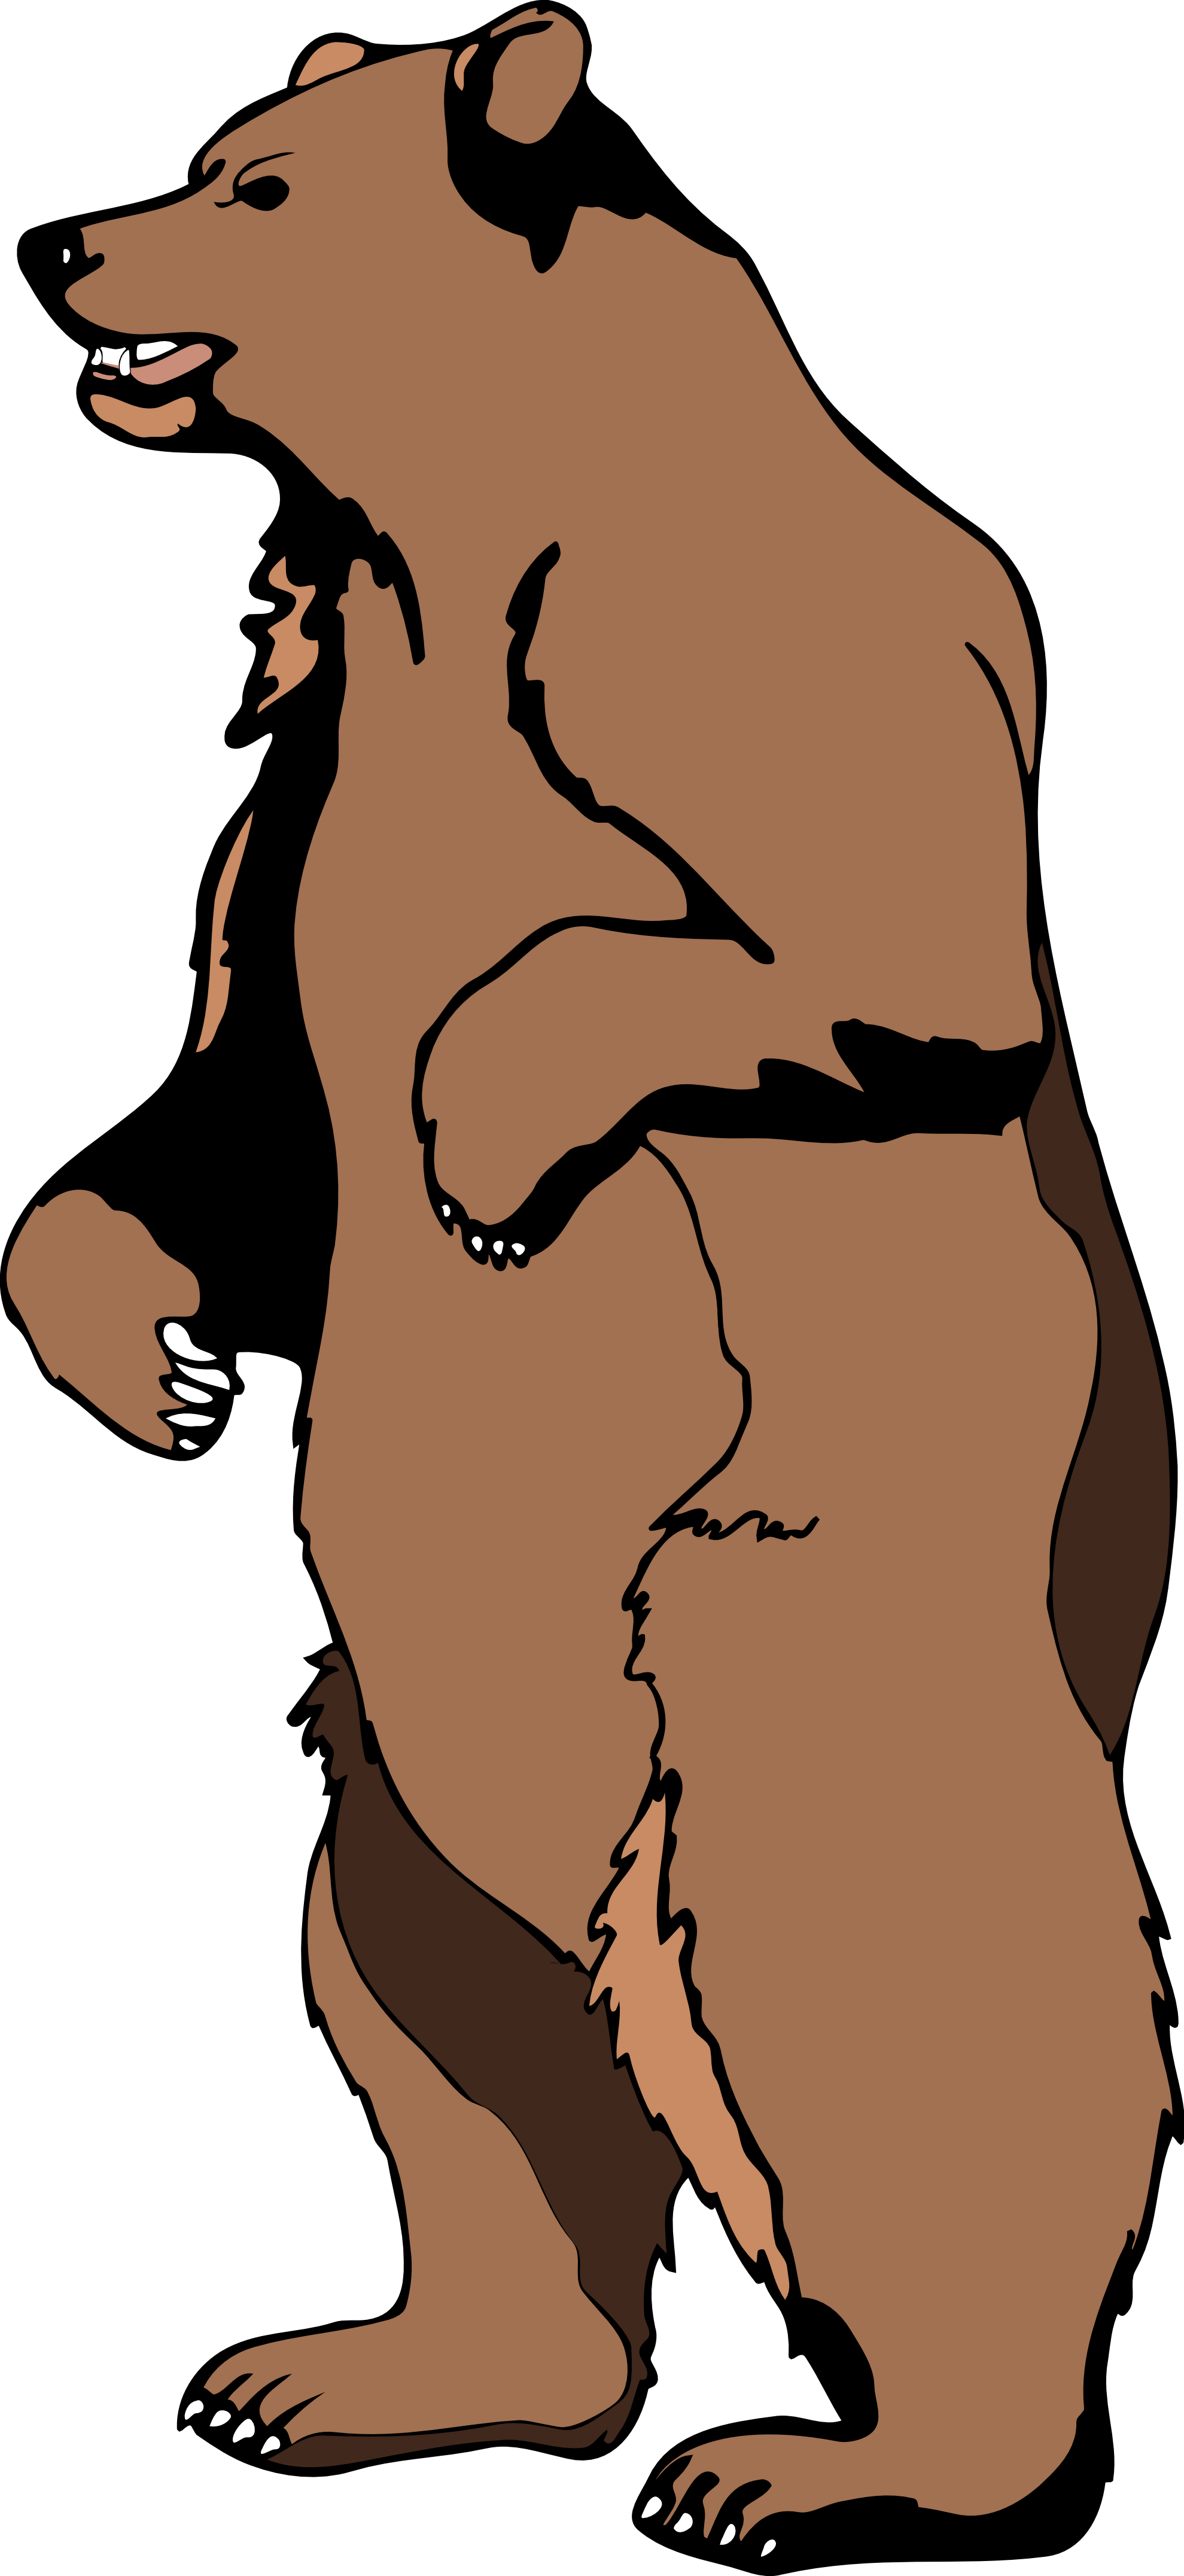 Standing bear clipart free clipart images